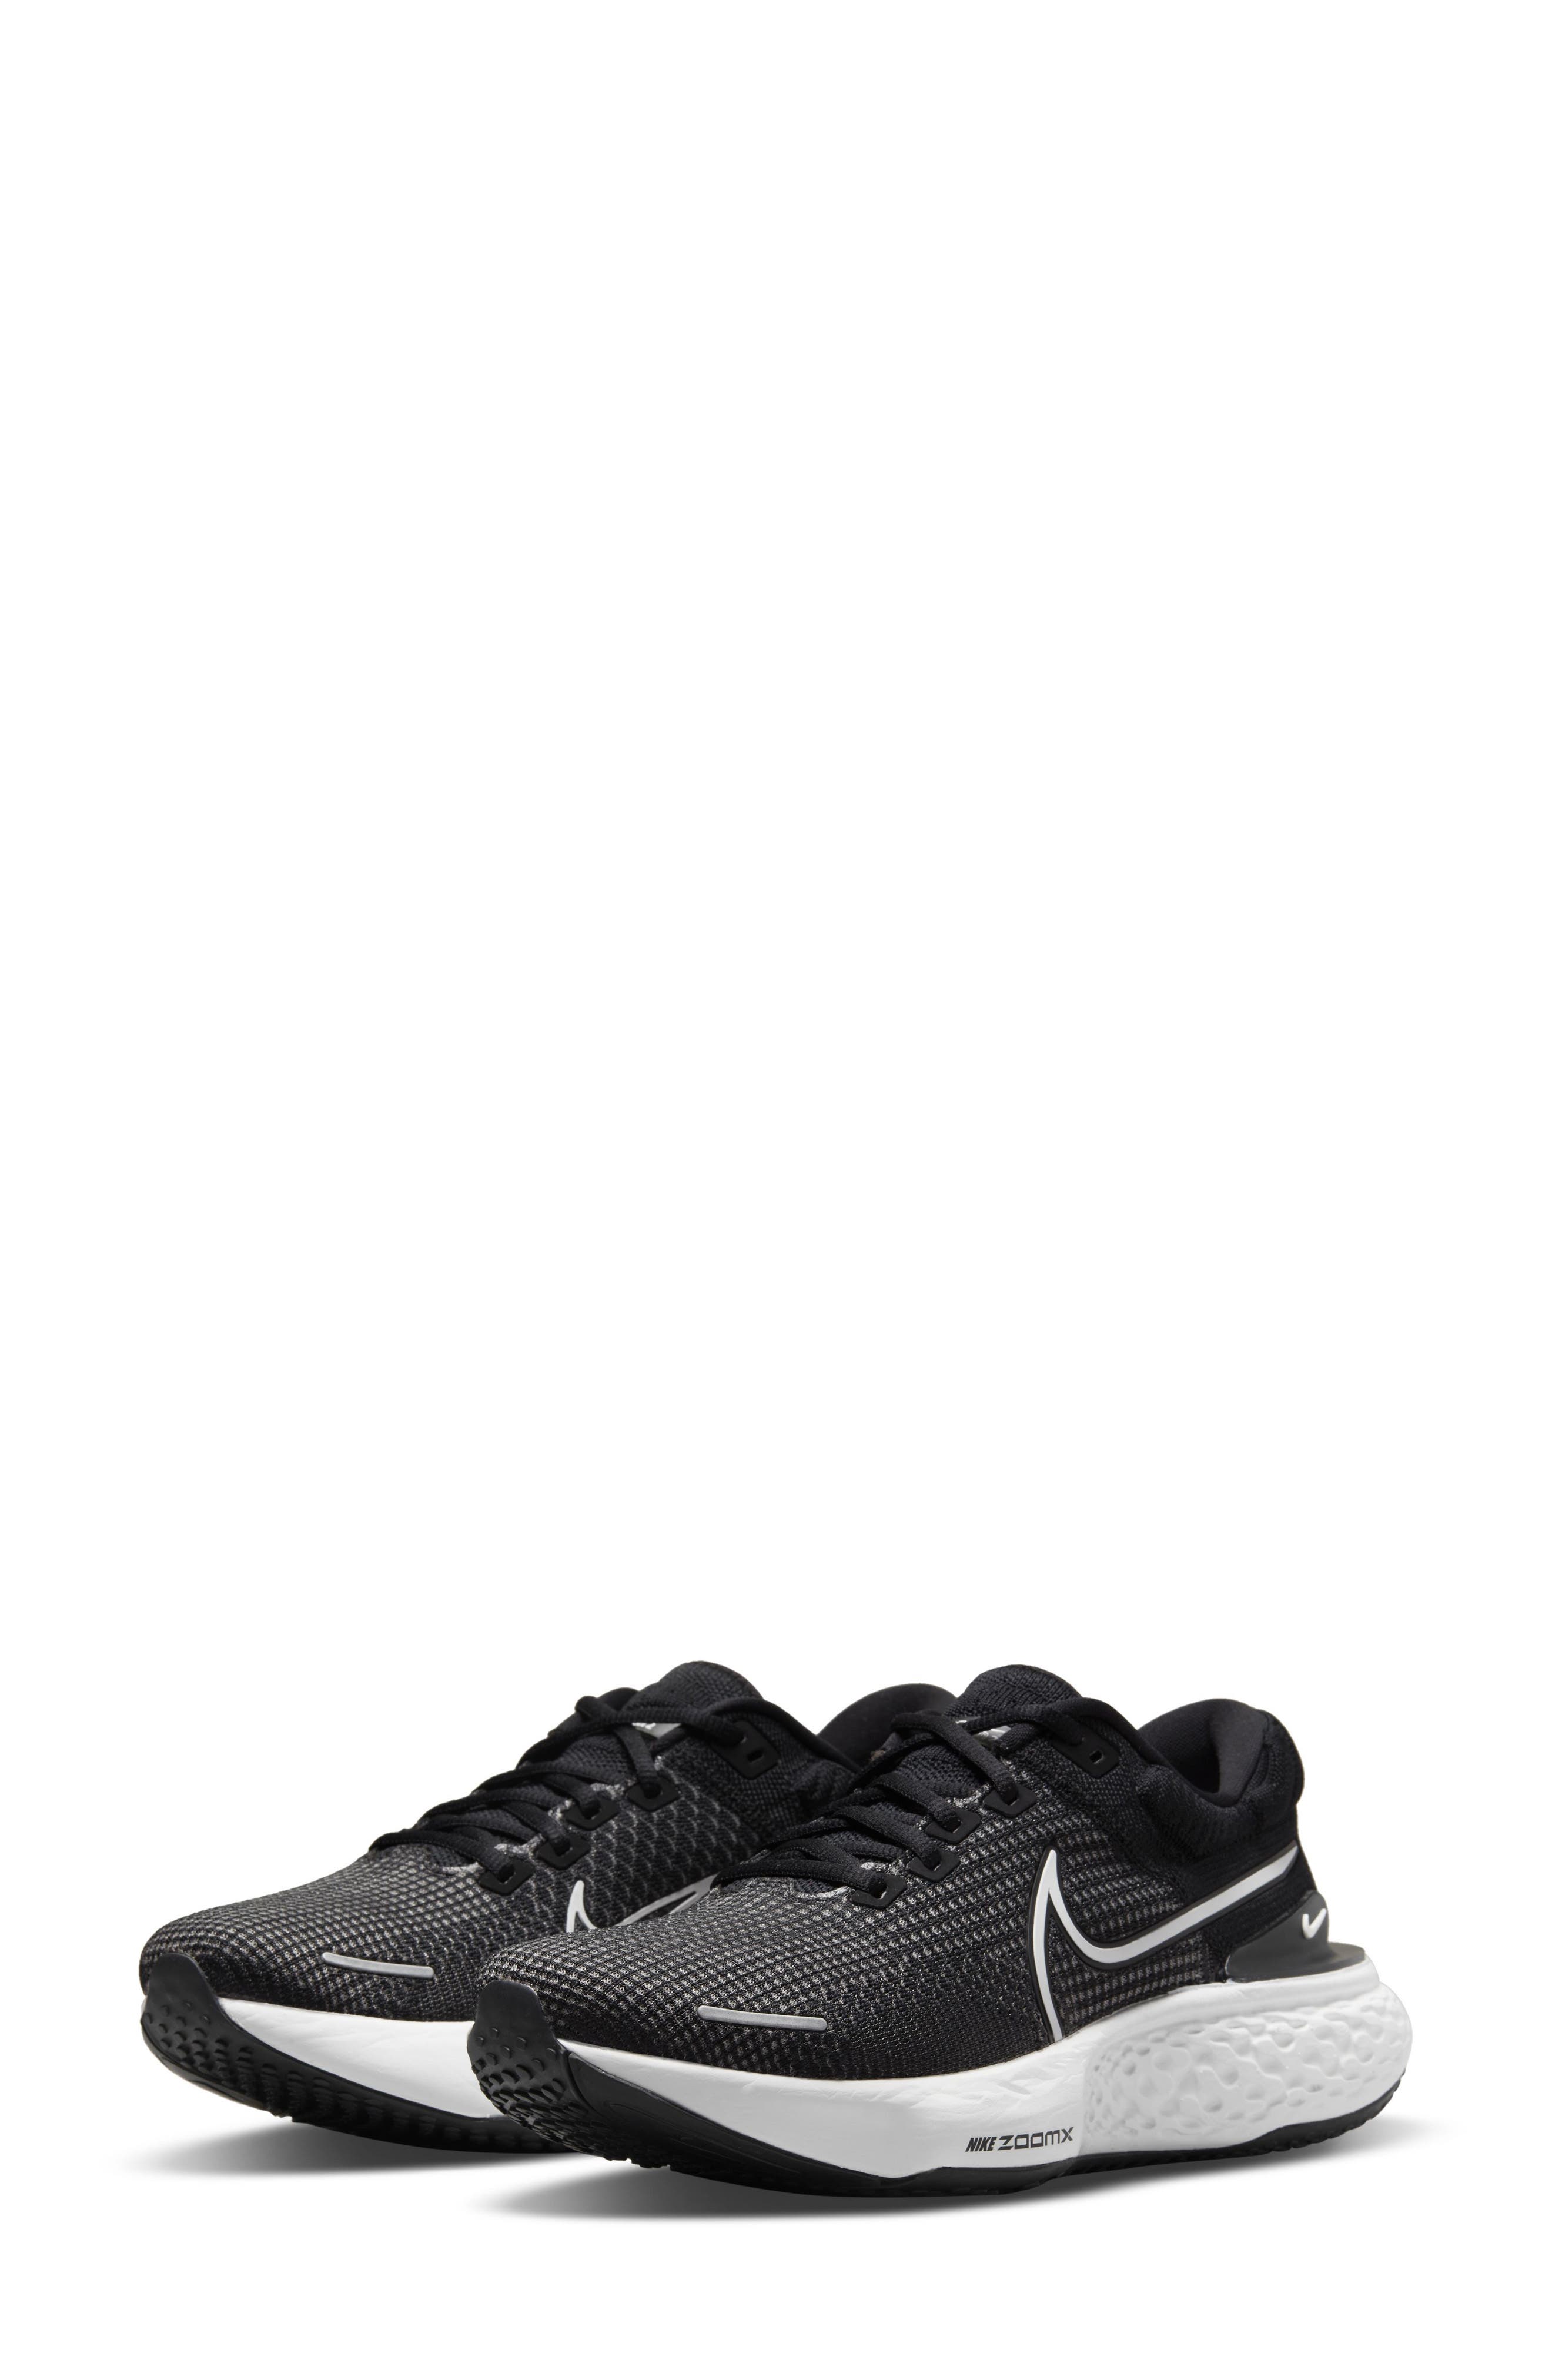 nike zoomx invincible run flyknit men's running shoes stores